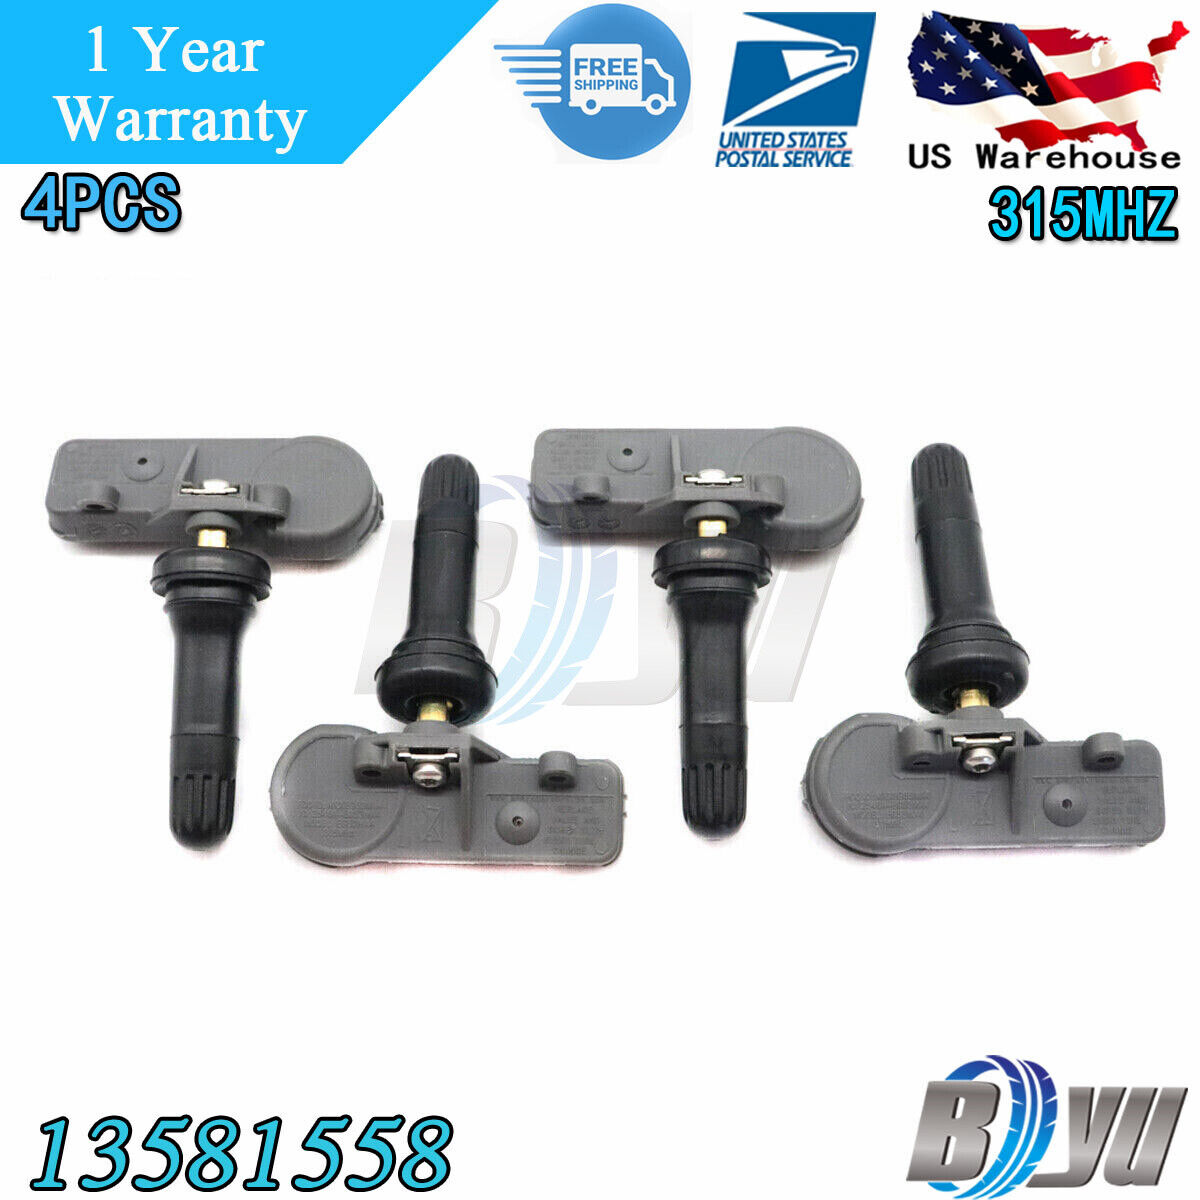 13586335 New Tire Pressure Monitoring Sensors TPMS For Chevy GMC GM 13581558